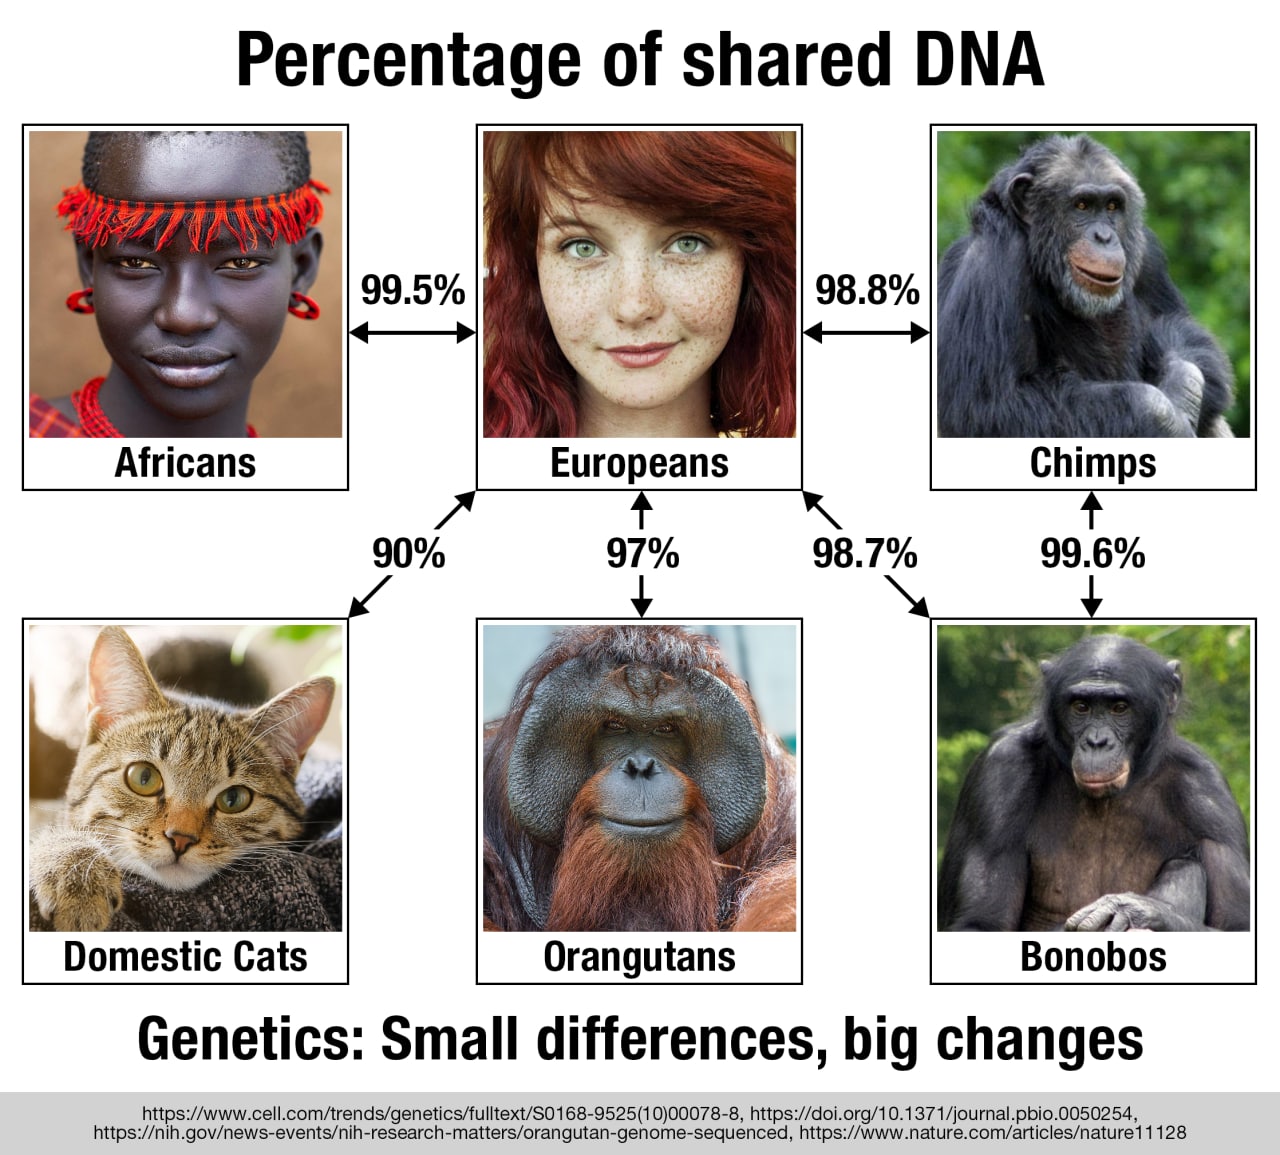 The genetics between Africans and Europeans differs by a total of 0.5%.